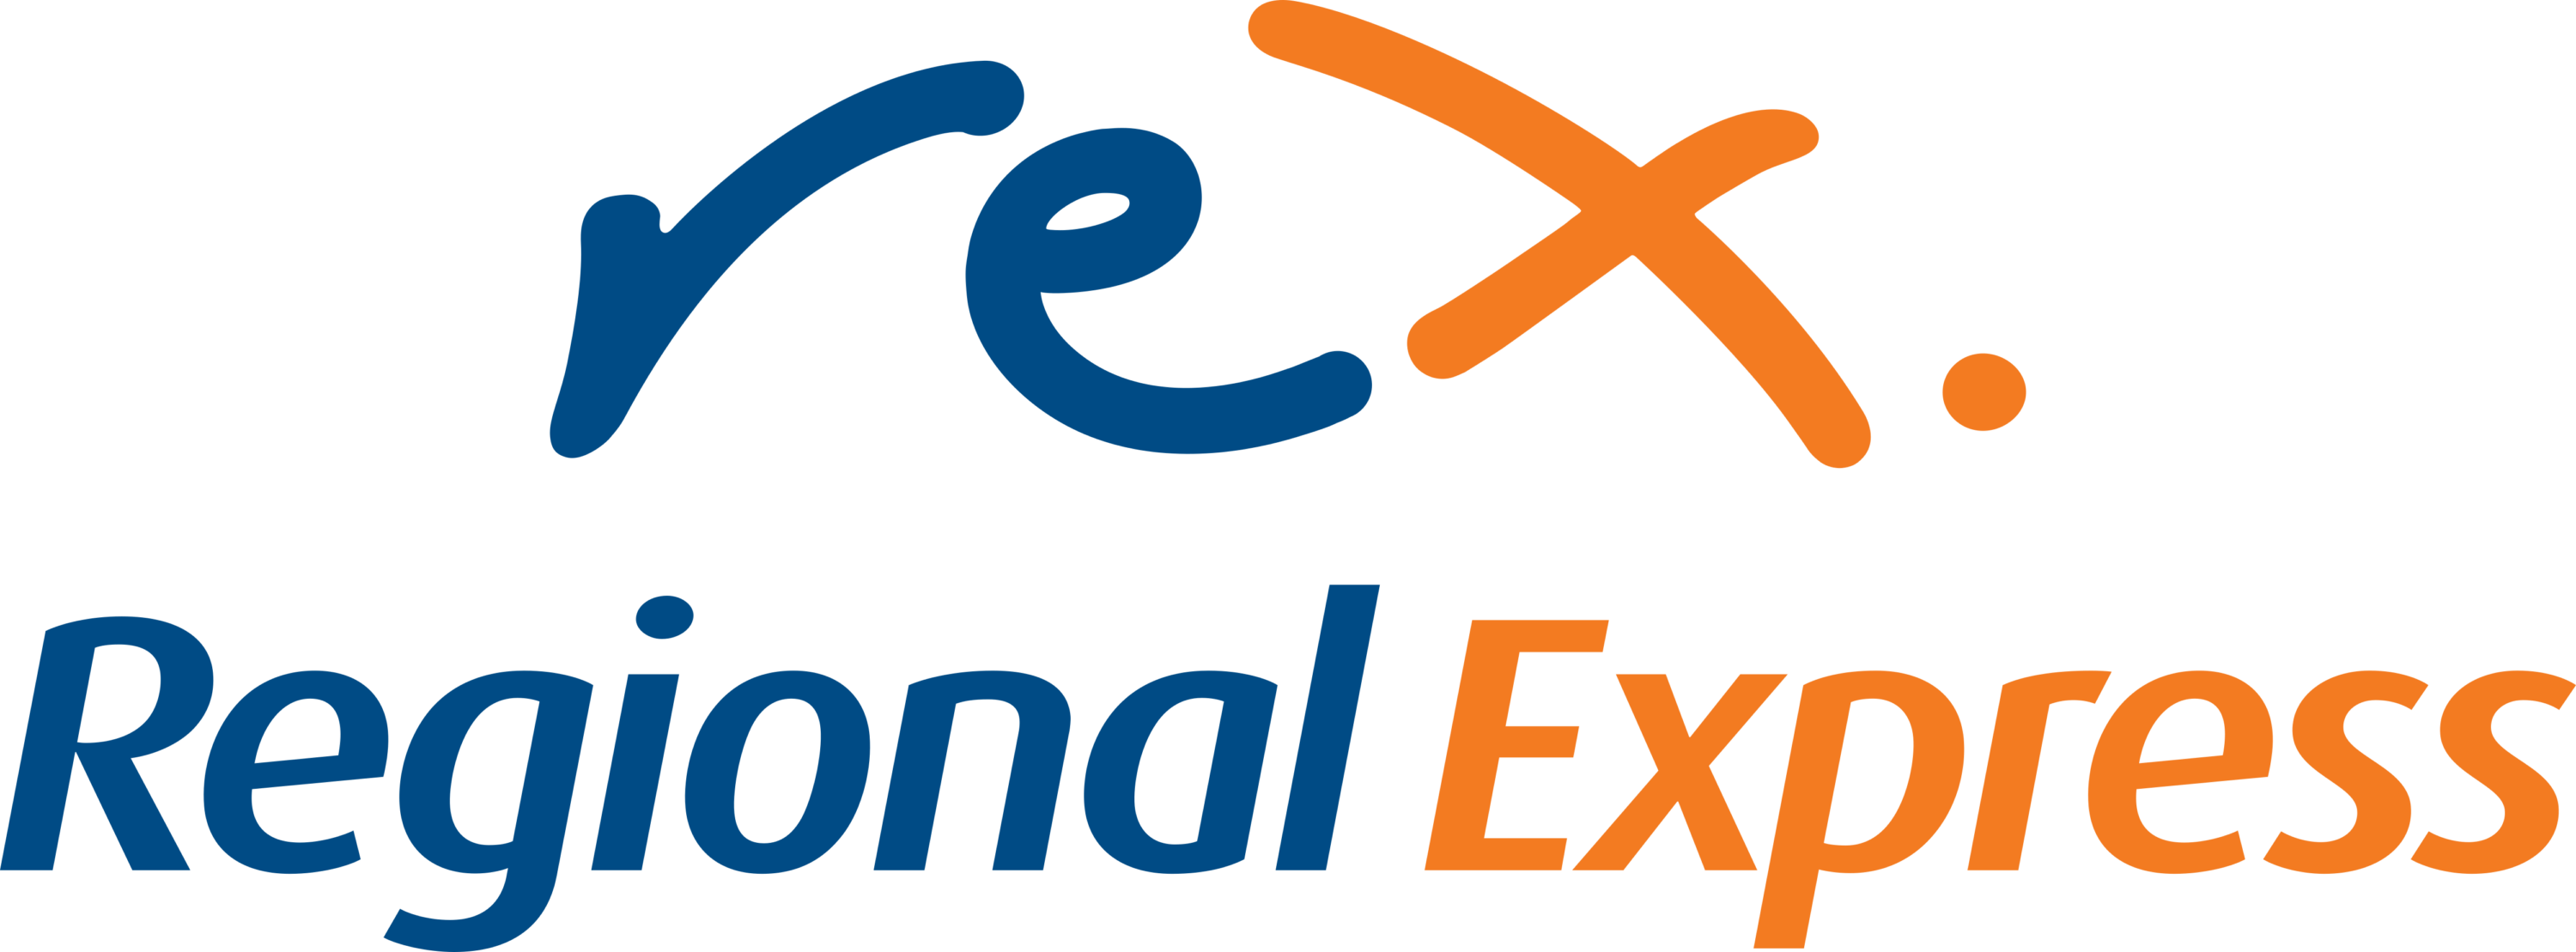 Regional Express Airlines Logo